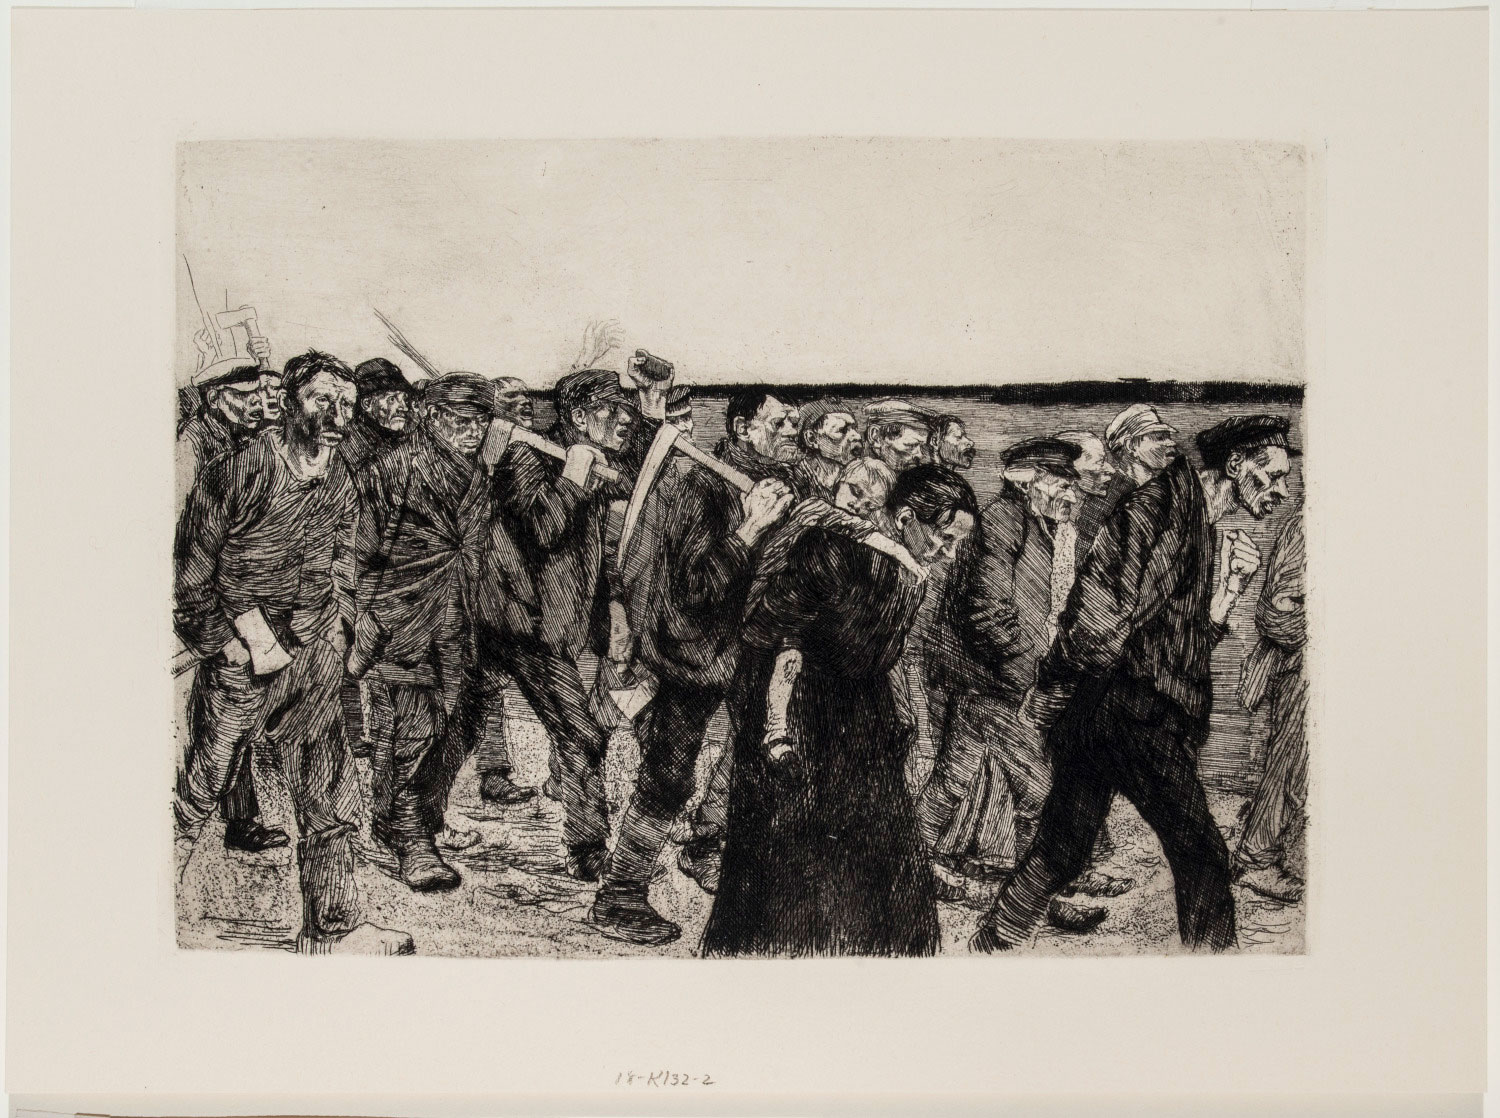 Kathe Kollwitz, March of the Weavers (Marcha de los tejedores), 19th-20th century. Etching. Bequest of Ruth Bank Weil. © 2020 Artists Rights Society (ARS), New York.